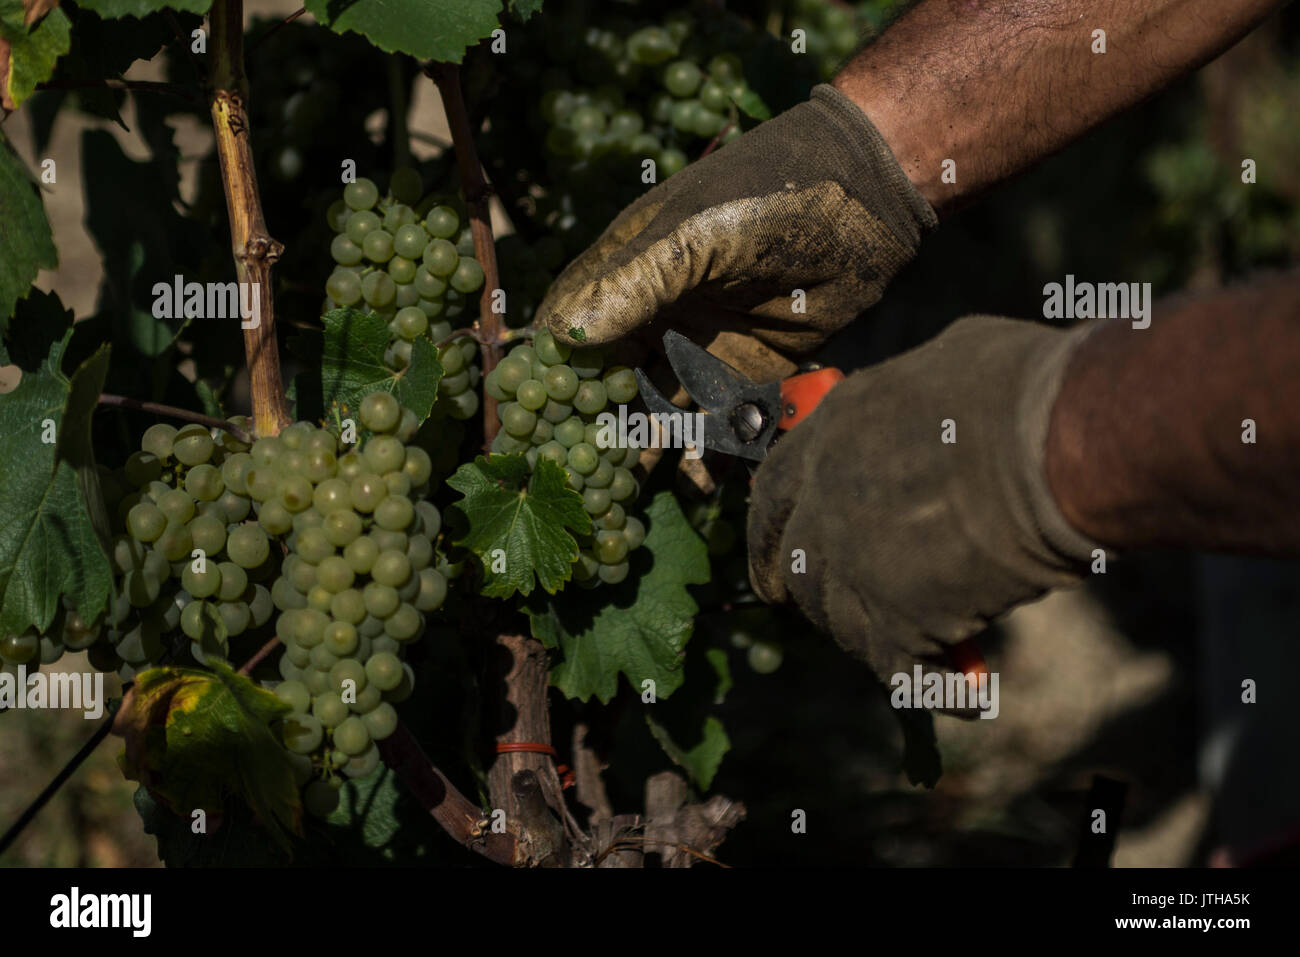 August 5, 2017 - Albs, Piedmont, Italy - Alba,Italy-August 9, 2017: Advance of the grape harvests of the wineries for harvesting because of the hot climate in Piedmont (Credit Image: © Stefano Guidi via ZUMA Wire) Stock Photo